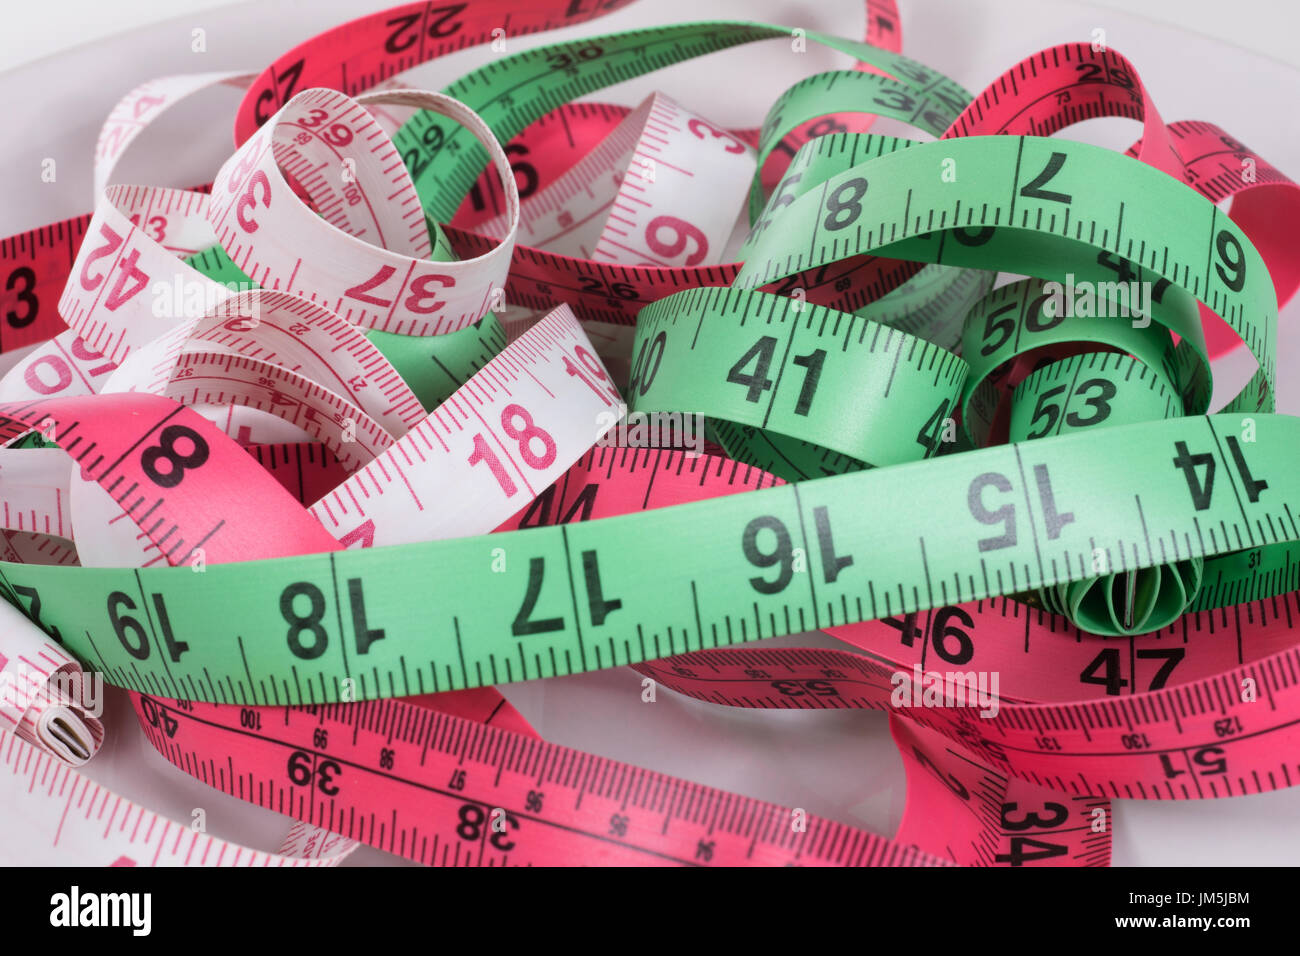 A Close-up of the Tape Measure Stock Image - Image of circumference, tape:  171275191